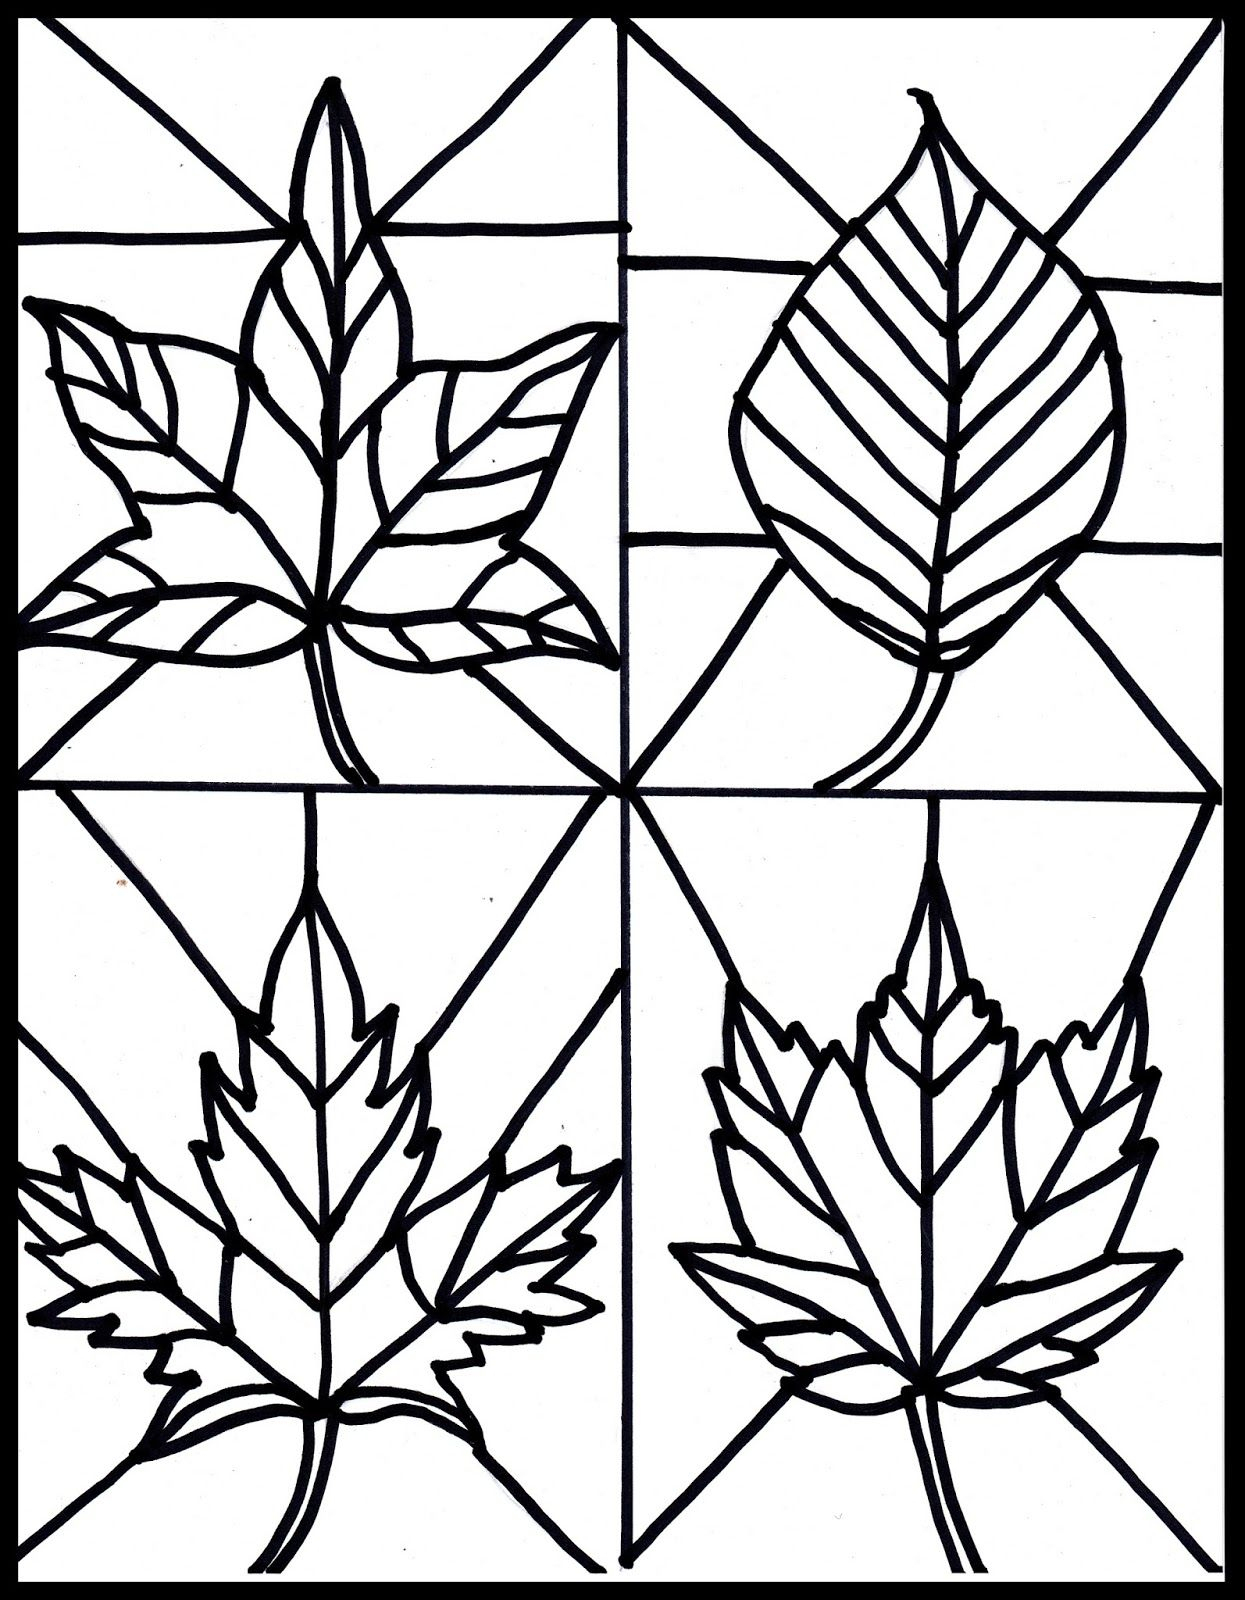 Free Fall Leaves Stained Glass Printable | Blogger Crafts We Love - Free Printable Stained Glass Patterns